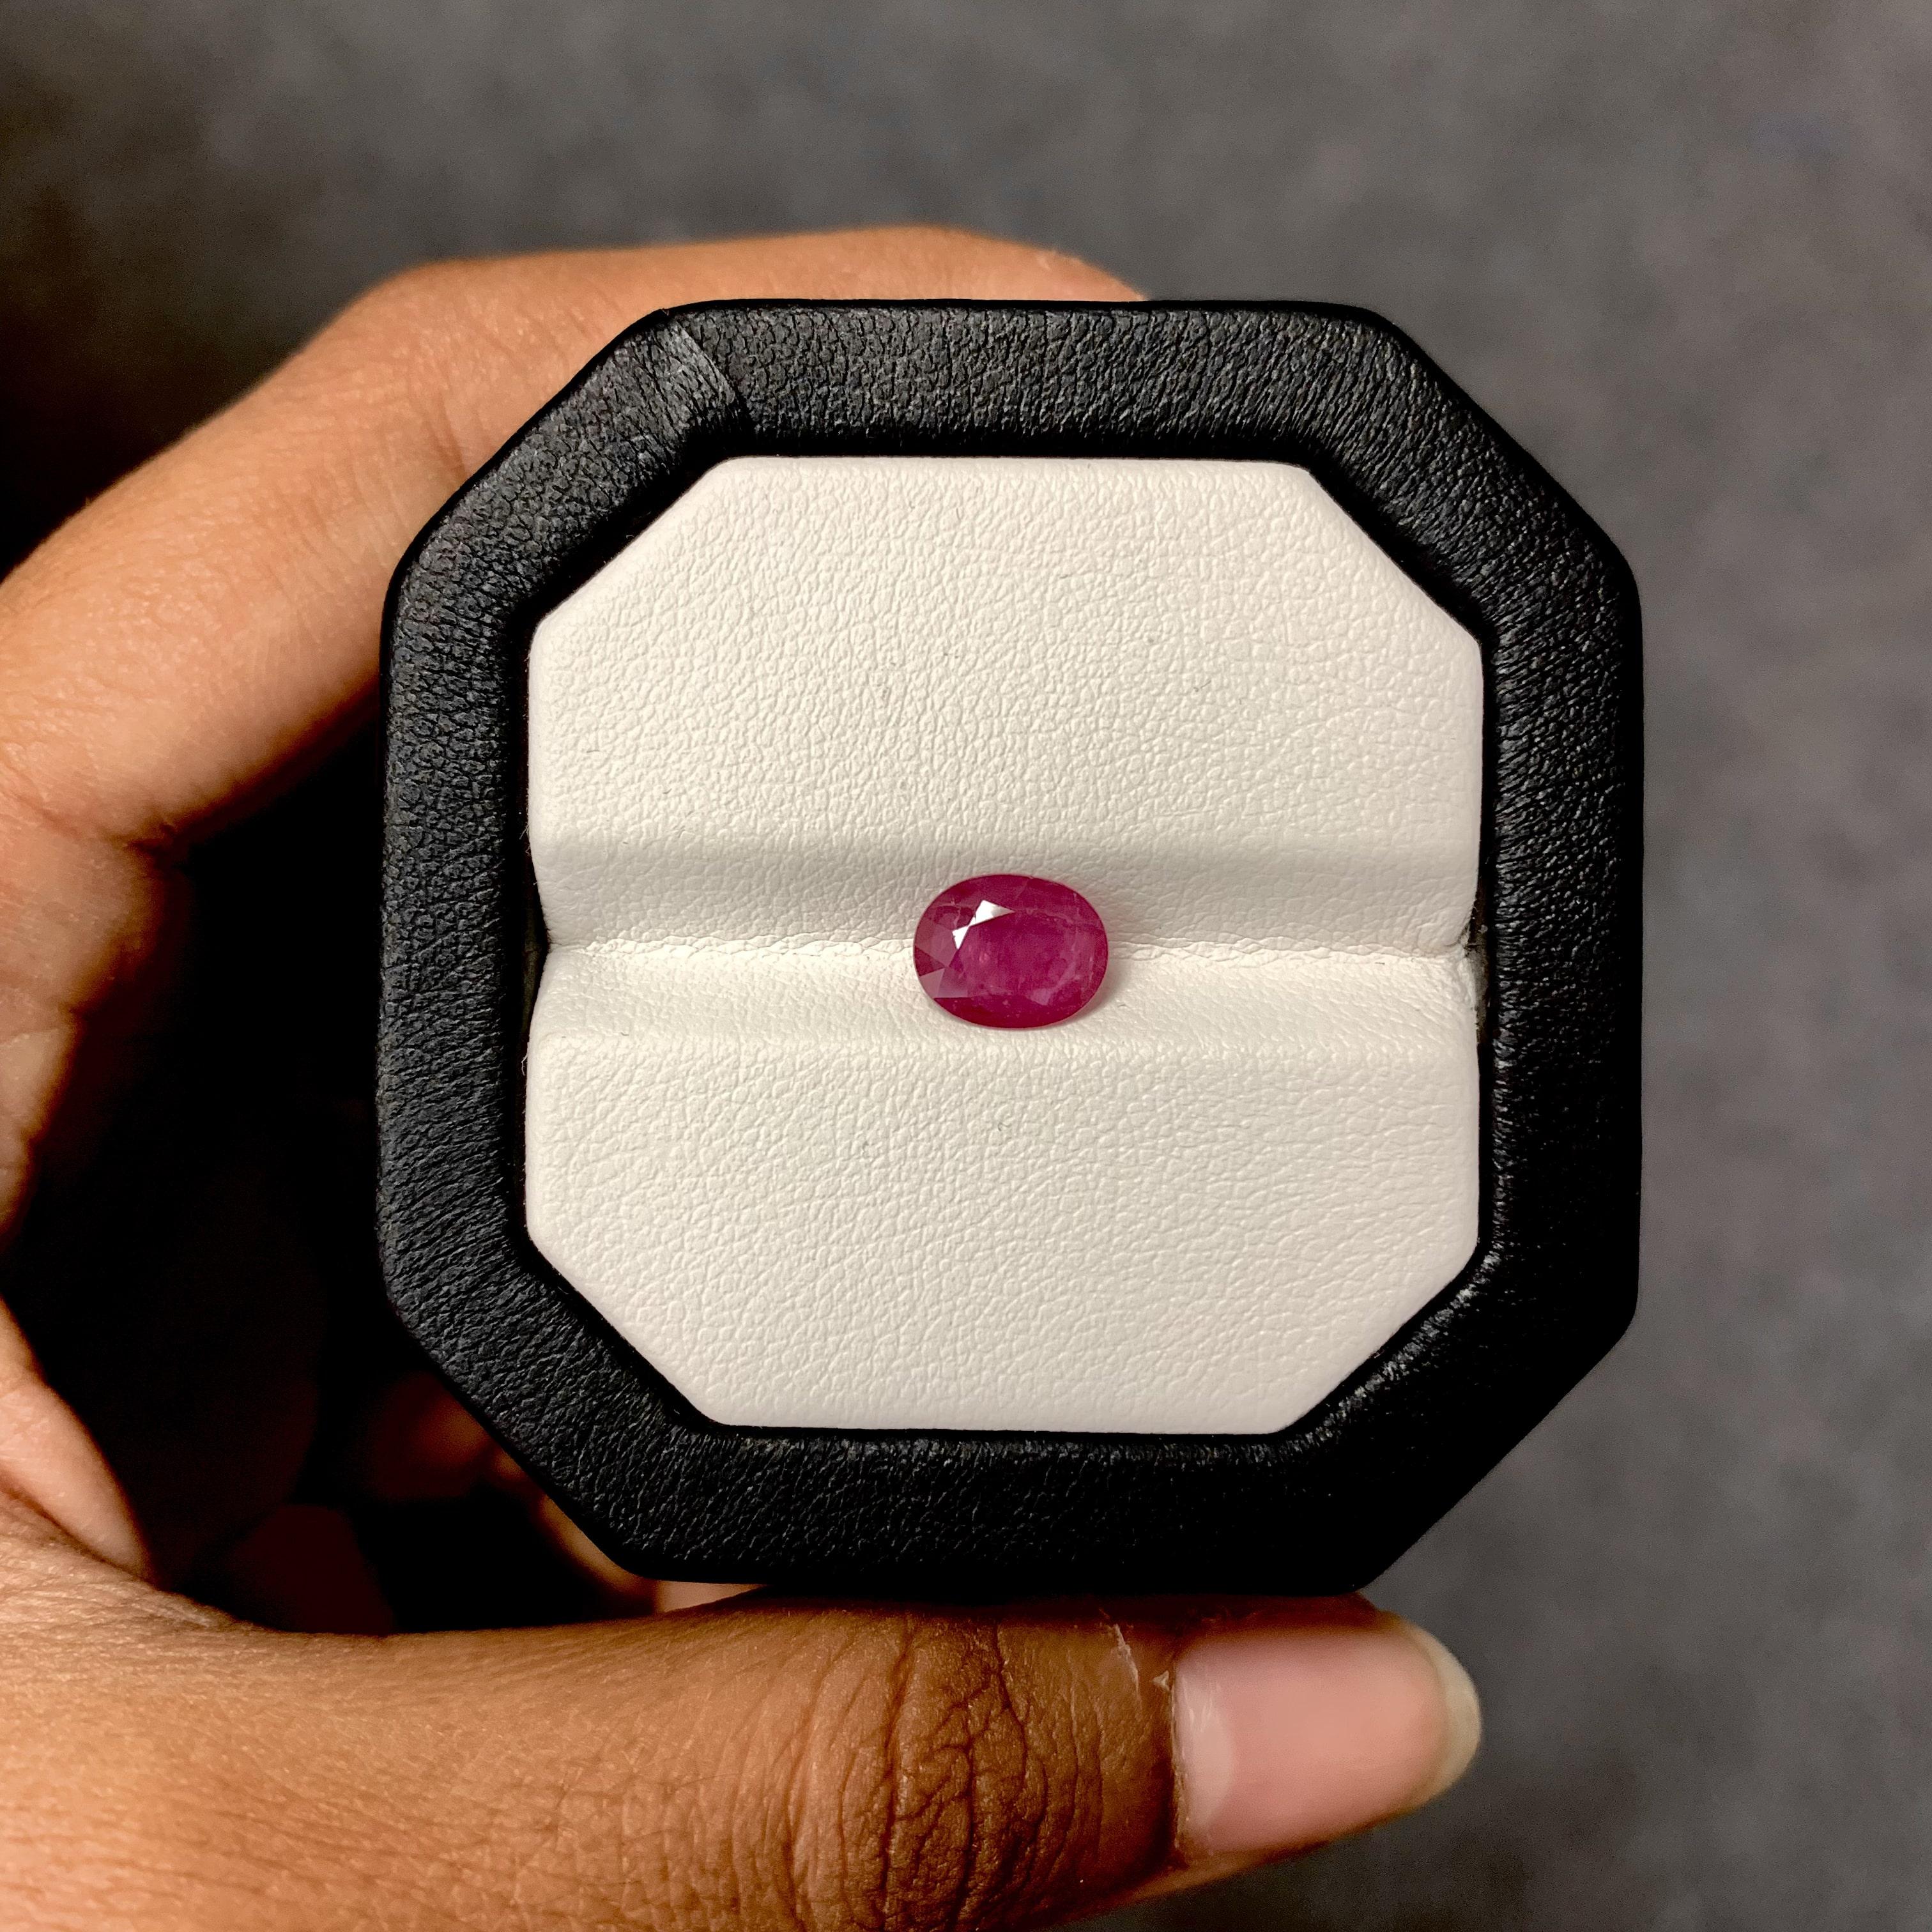 A stunning 1.44 Carat Ruby gemstone. It is completely natural and hasn't undergone any form of treatment. The ruby is an oval shape and its color is a pinkish-red that is absolutely gorgeous!

The measurements of the Ruby stone are 8.38 x 6.71 x